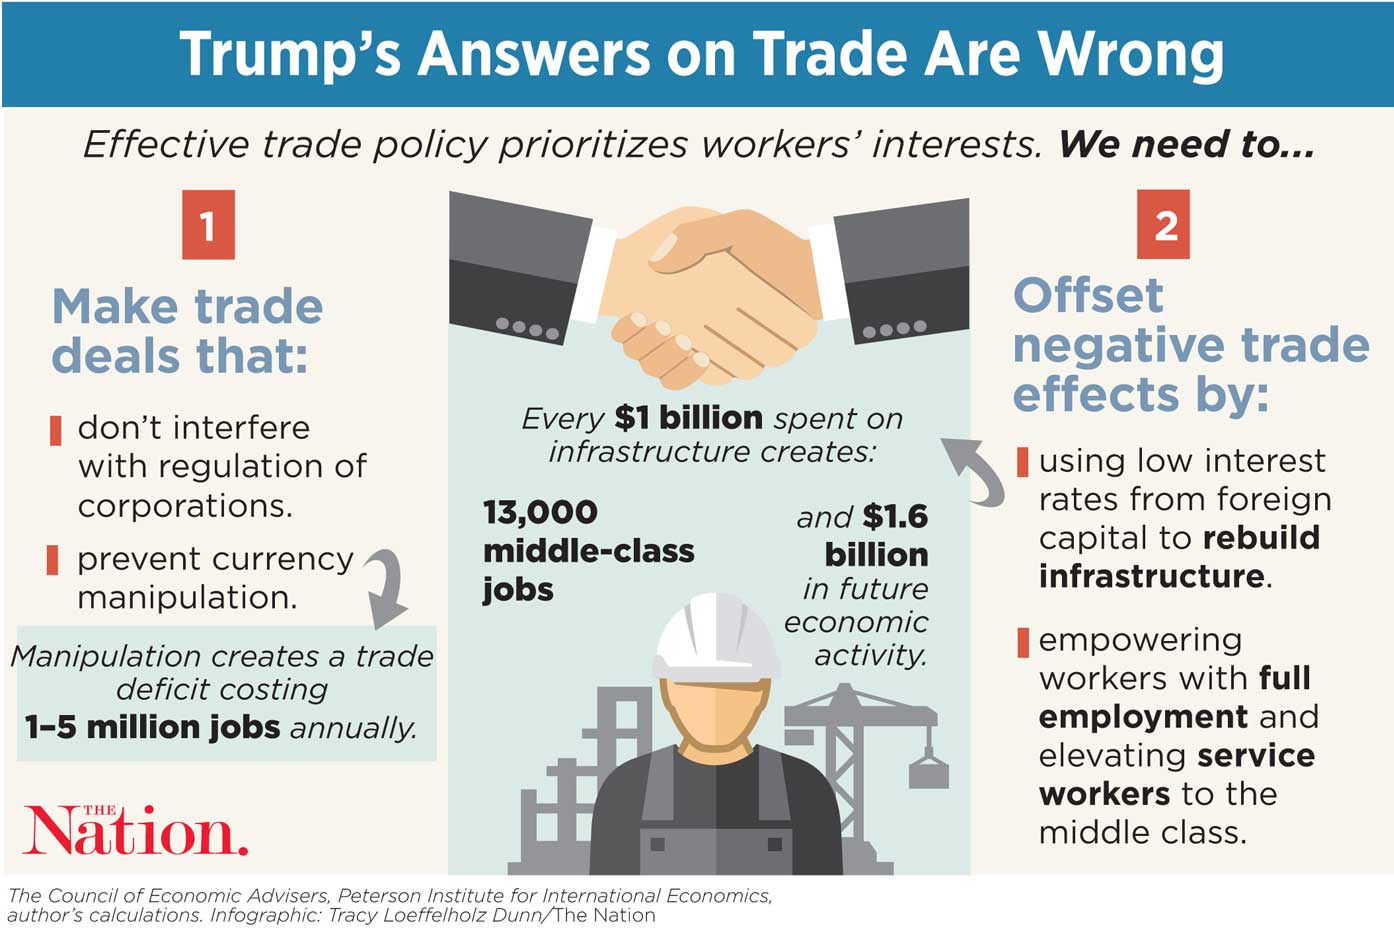 Here’s the Trade Policy That Progressives Should Get Behind